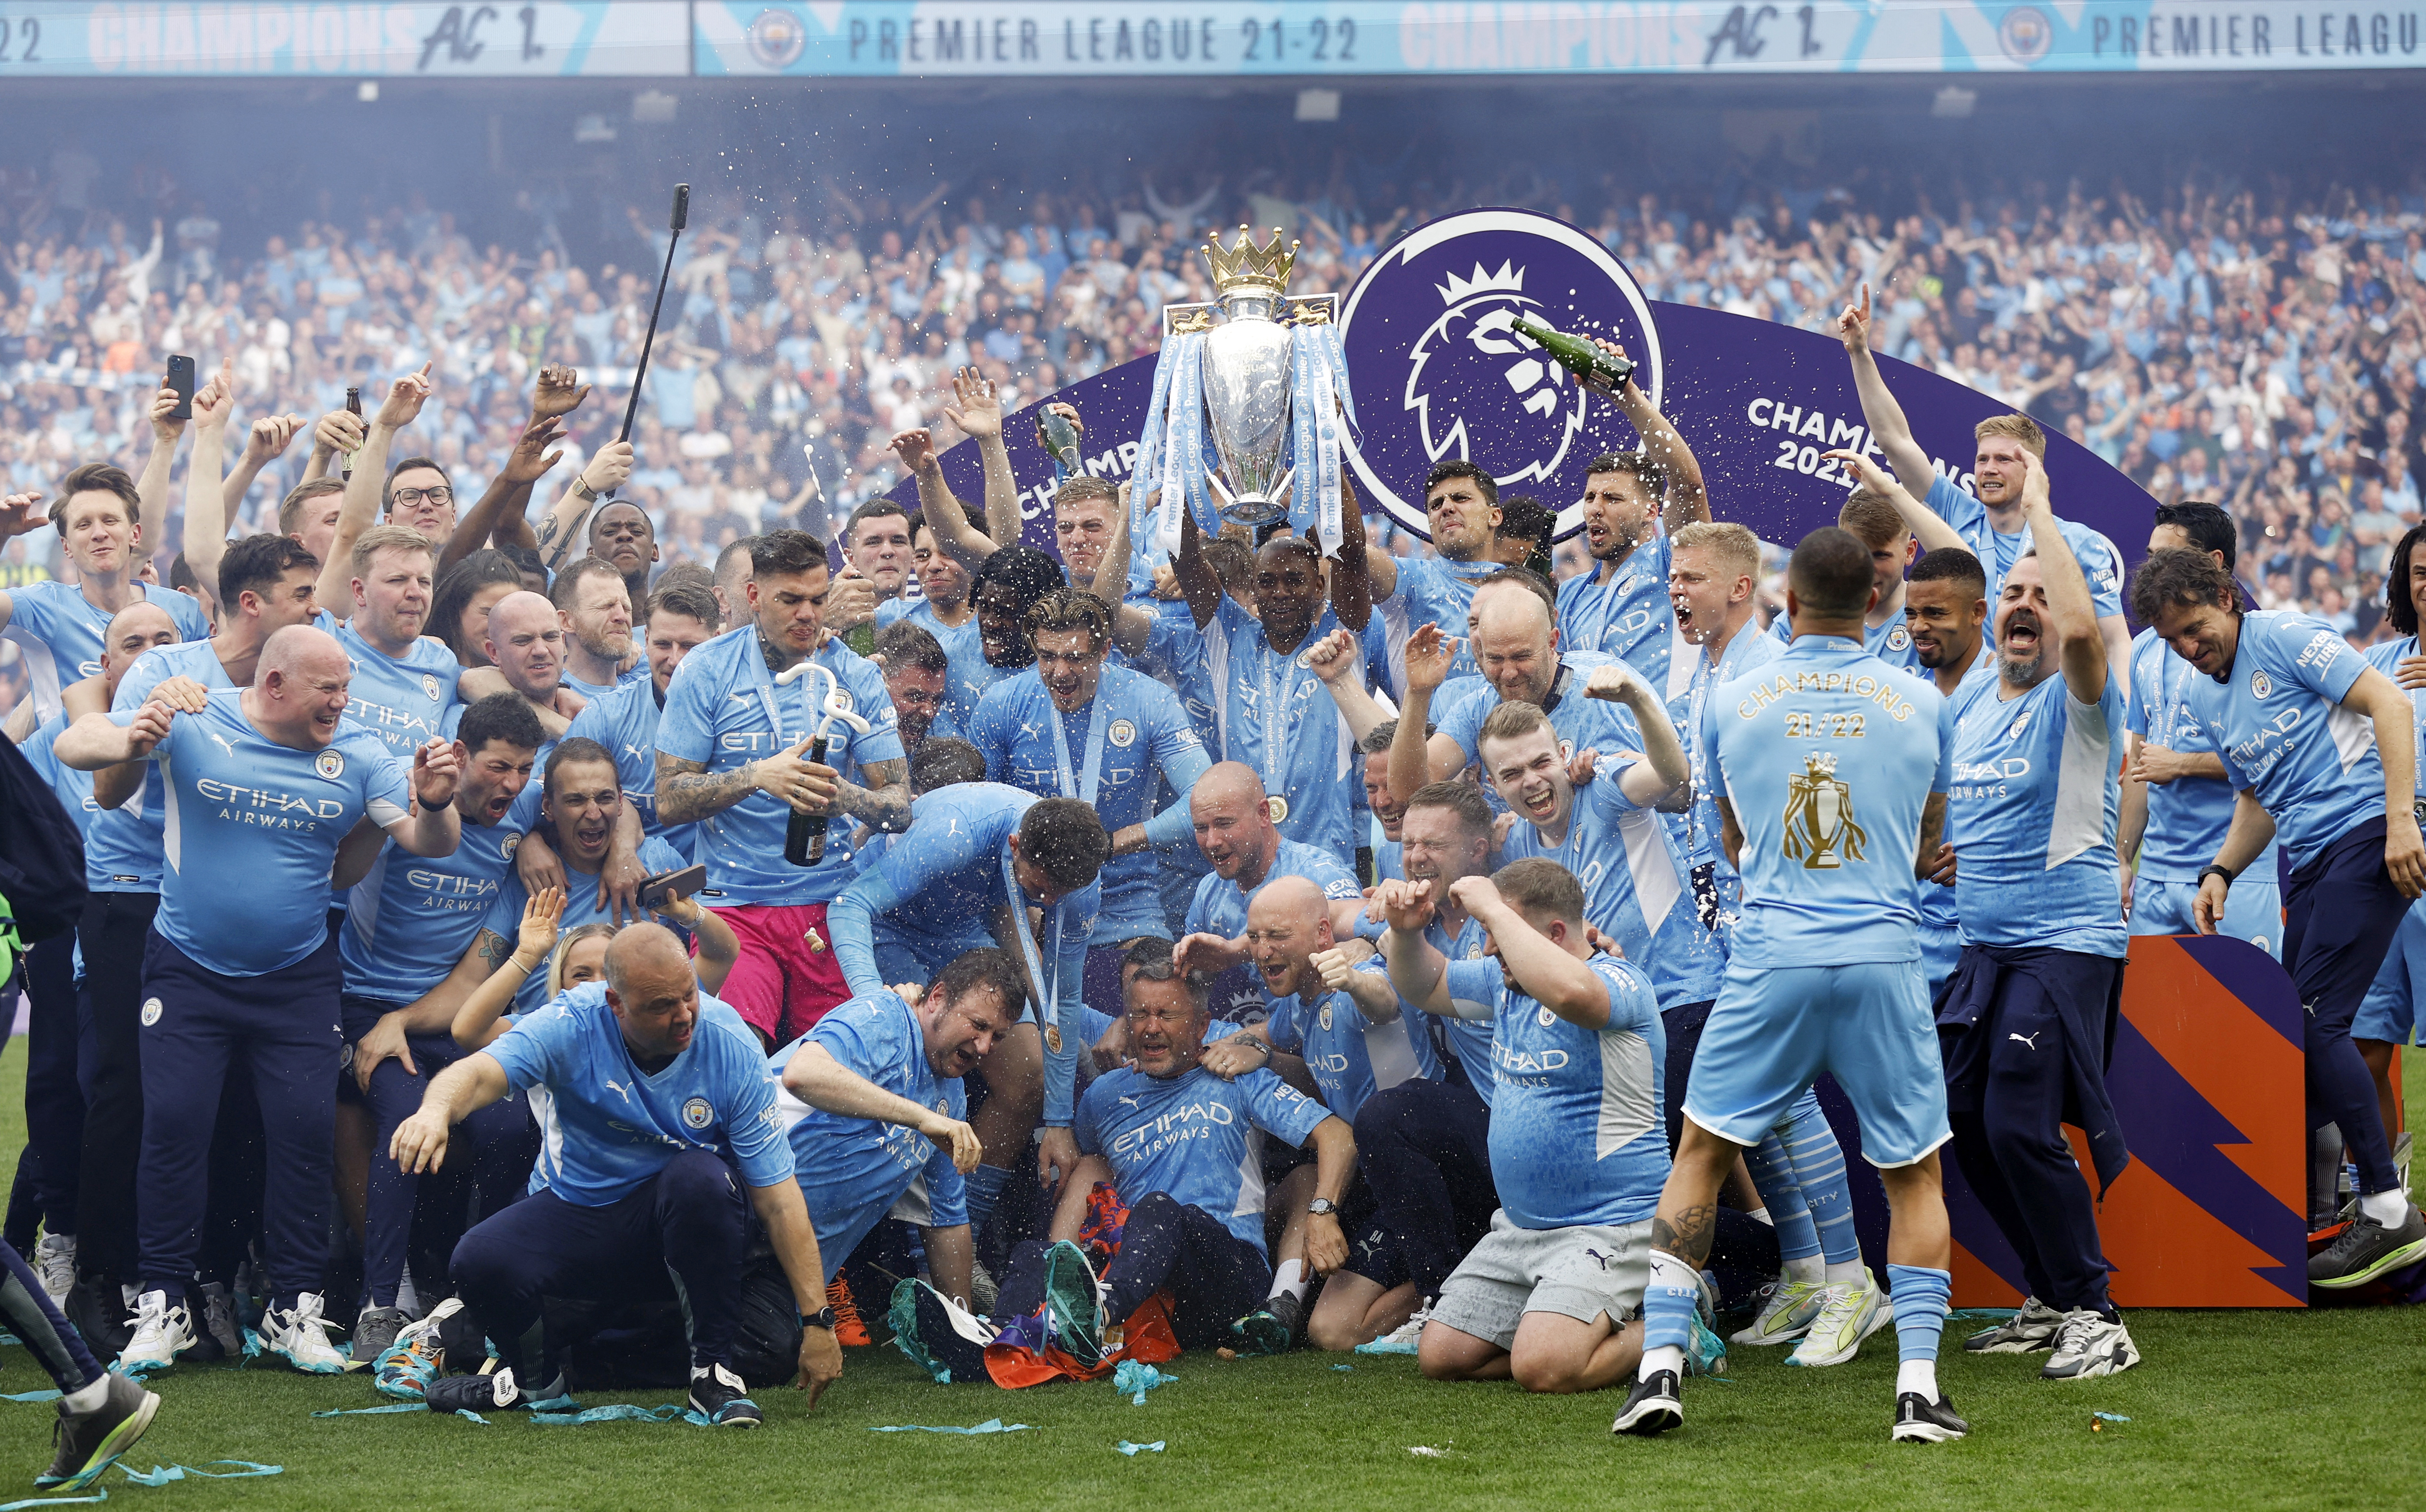 Man City fight back to win title, Spurs take fourth - Reuters